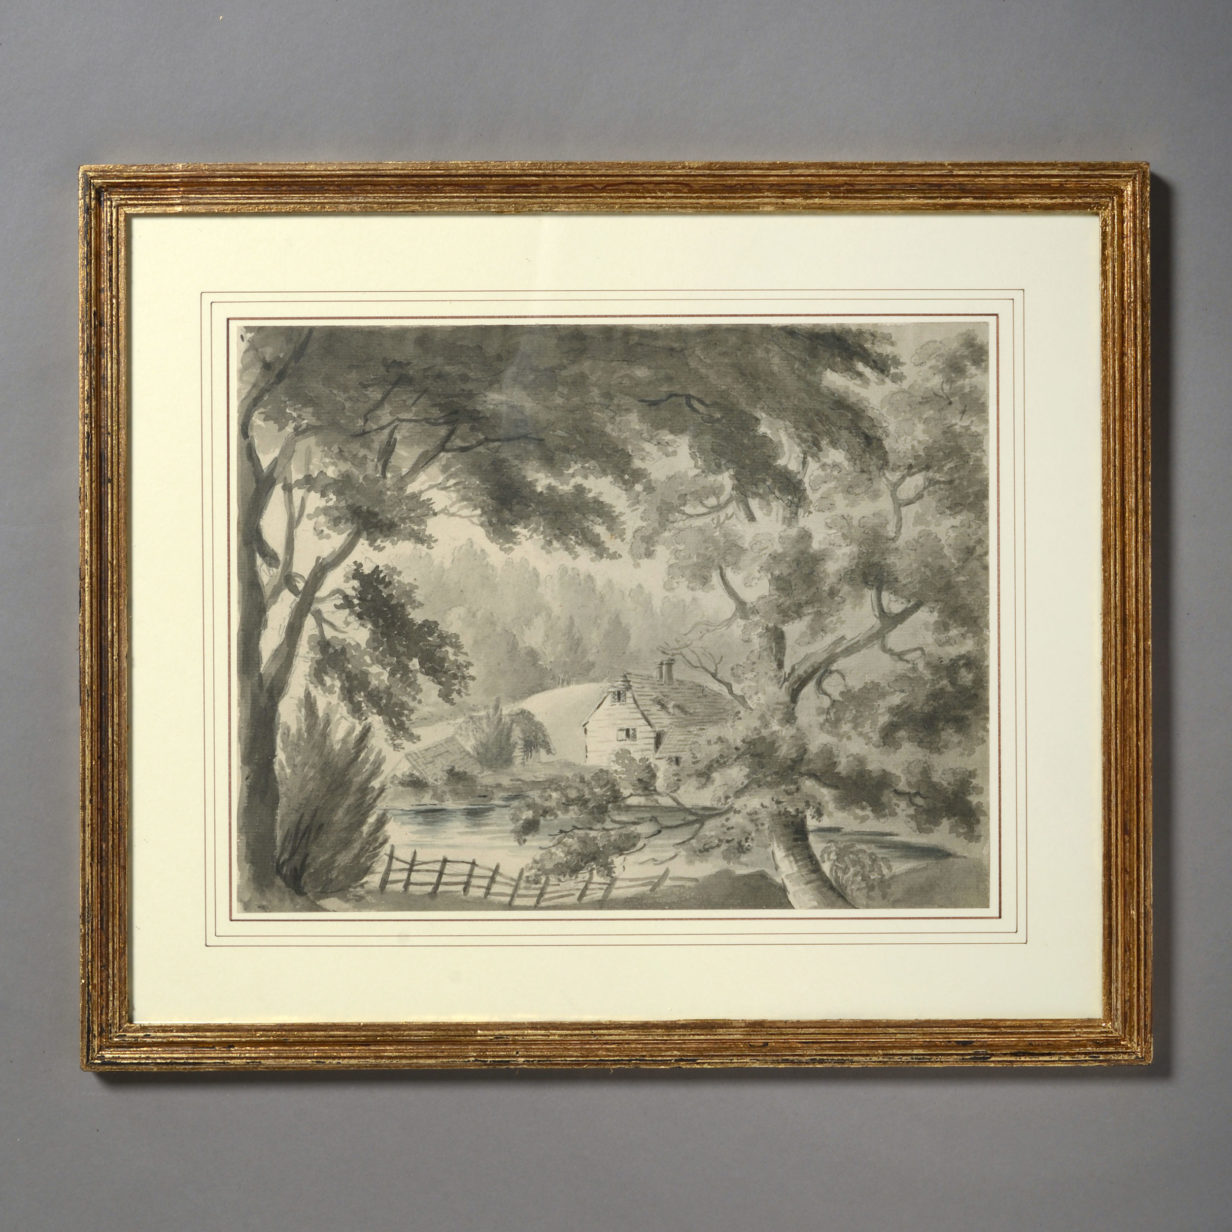 Four early 19th century regency period sepia landscapes